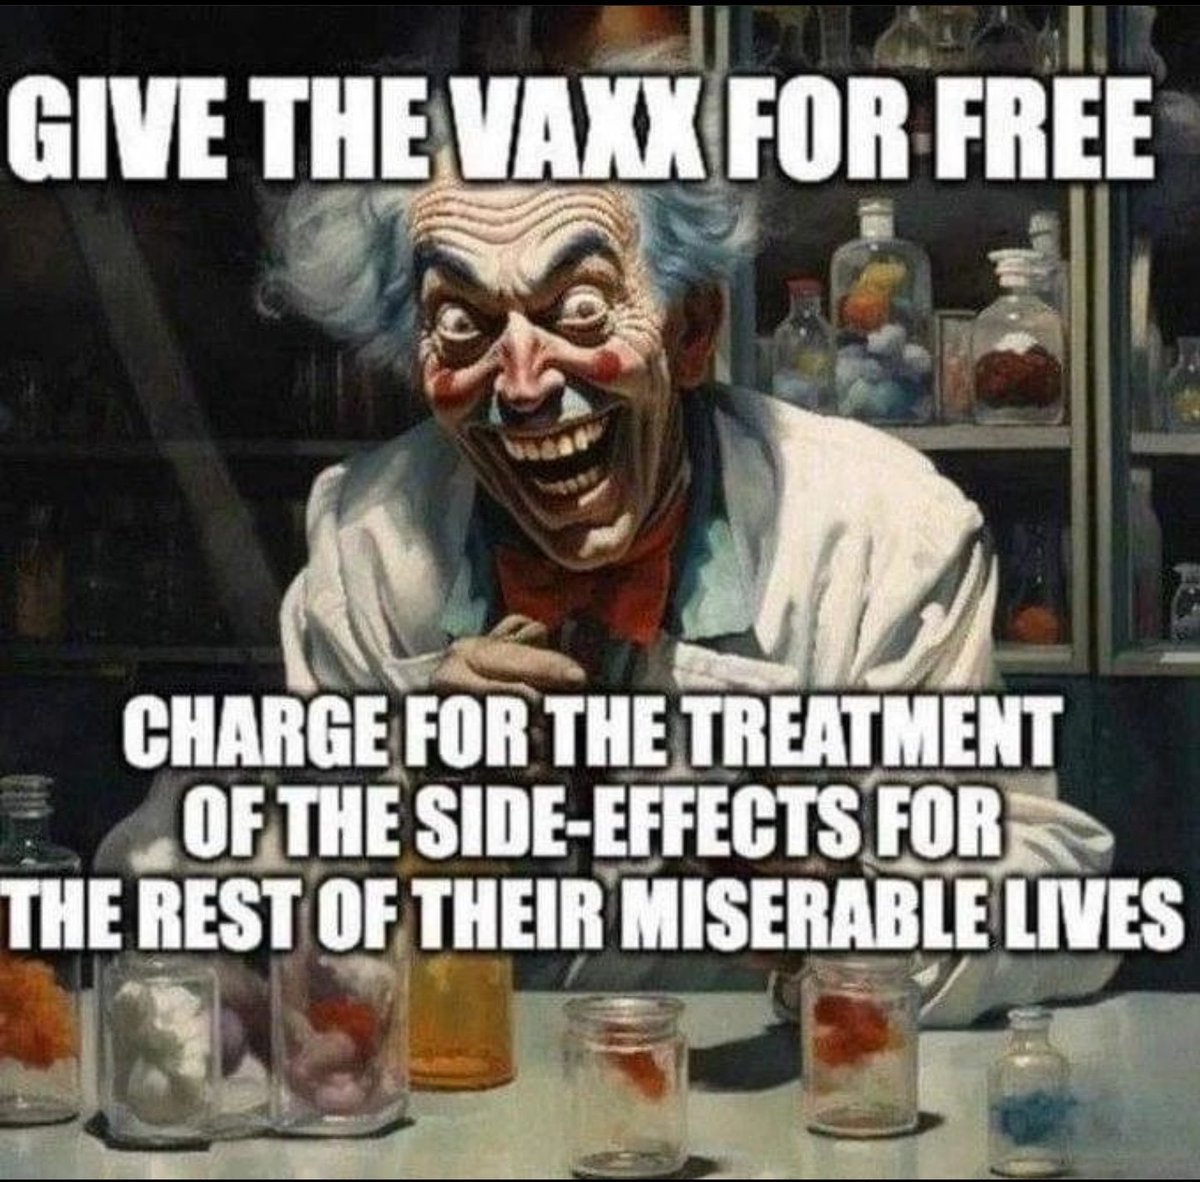 #obediencetraining #vax #forfree #sideeffects #forlife #ifyousurvive #war #illness #disinformation #misinformation #diedsuddenly